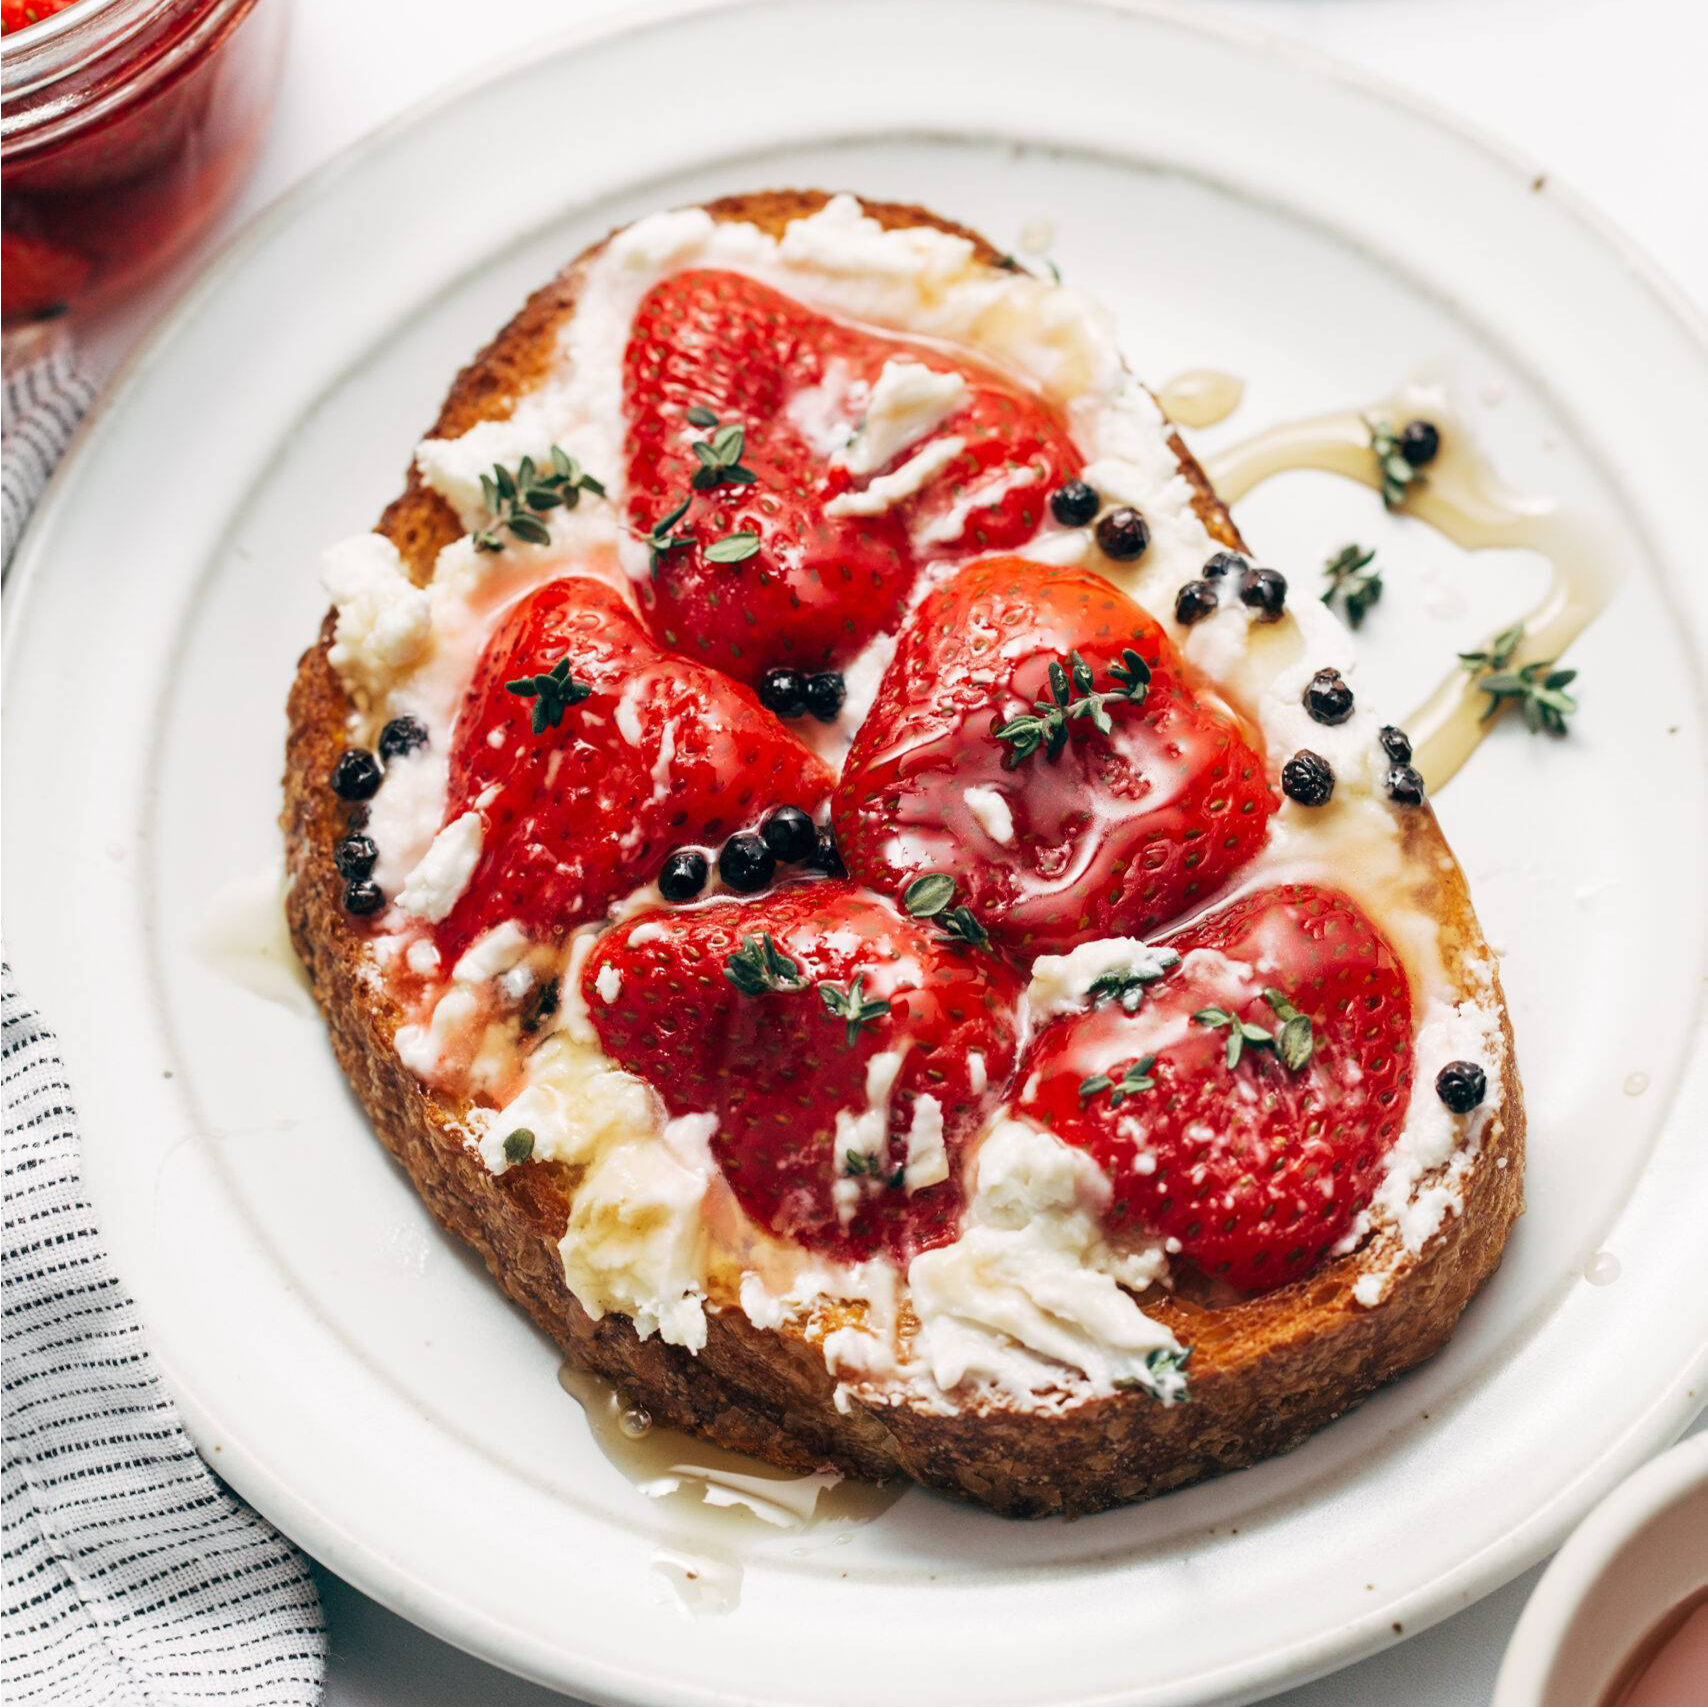 Pickled strawberries on a piece of toast with creamy cheese.